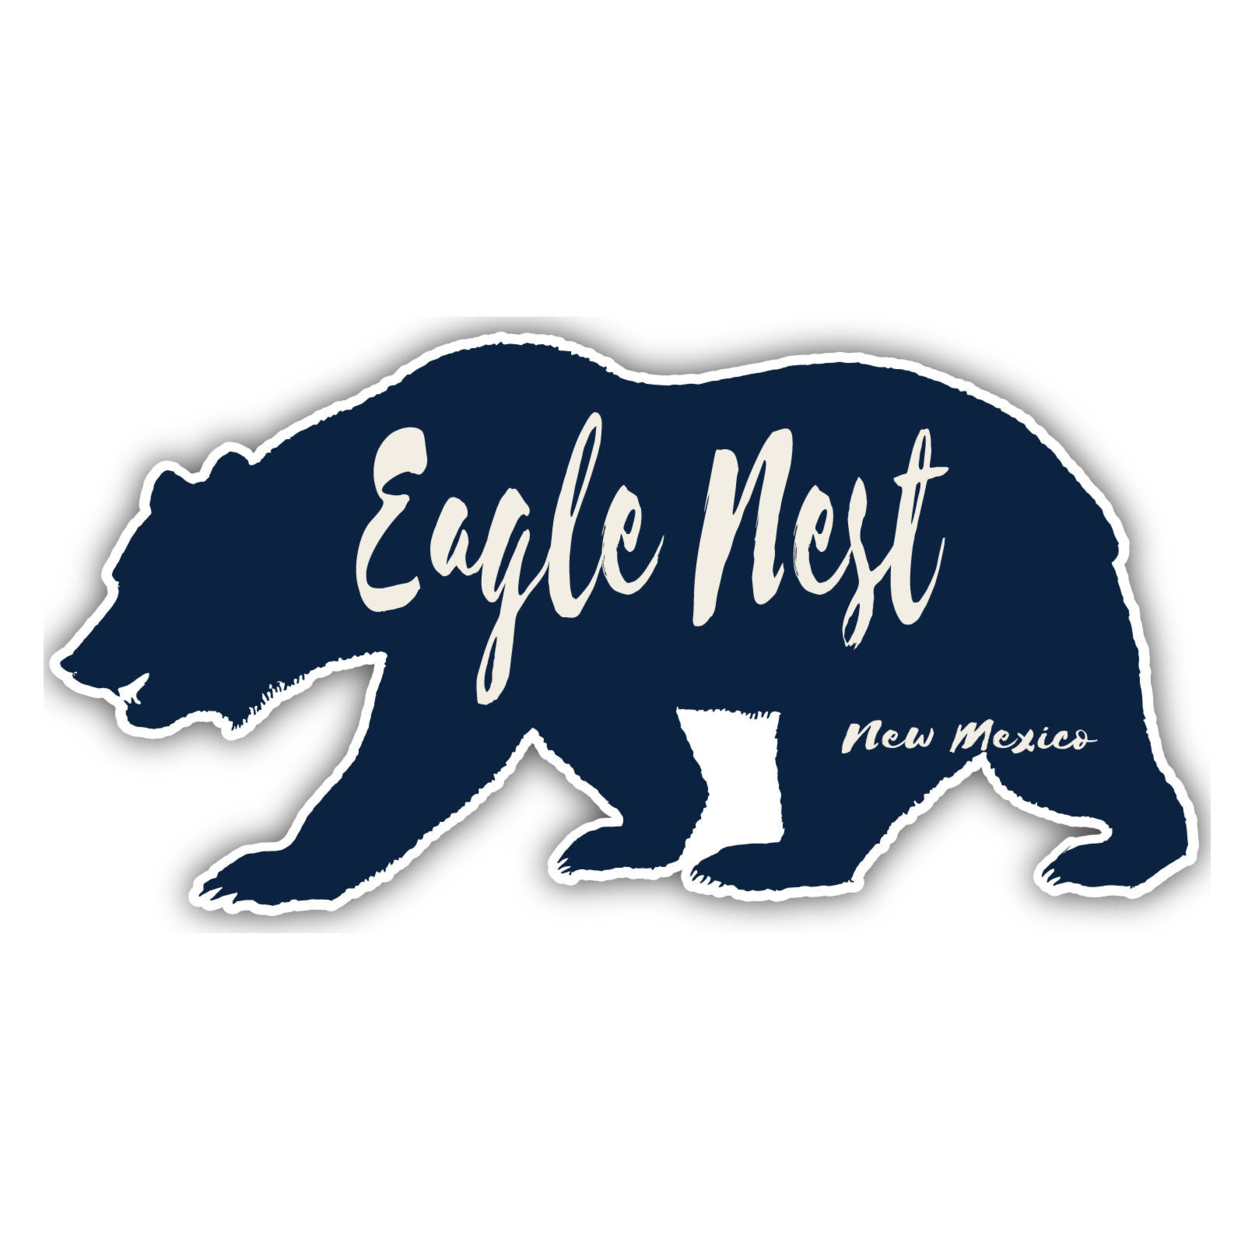 Eagle Nest New Mexico Souvenir Decorative Stickers (Choose Theme And Size) - 4-Pack, 2-Inch, Great Outdoors